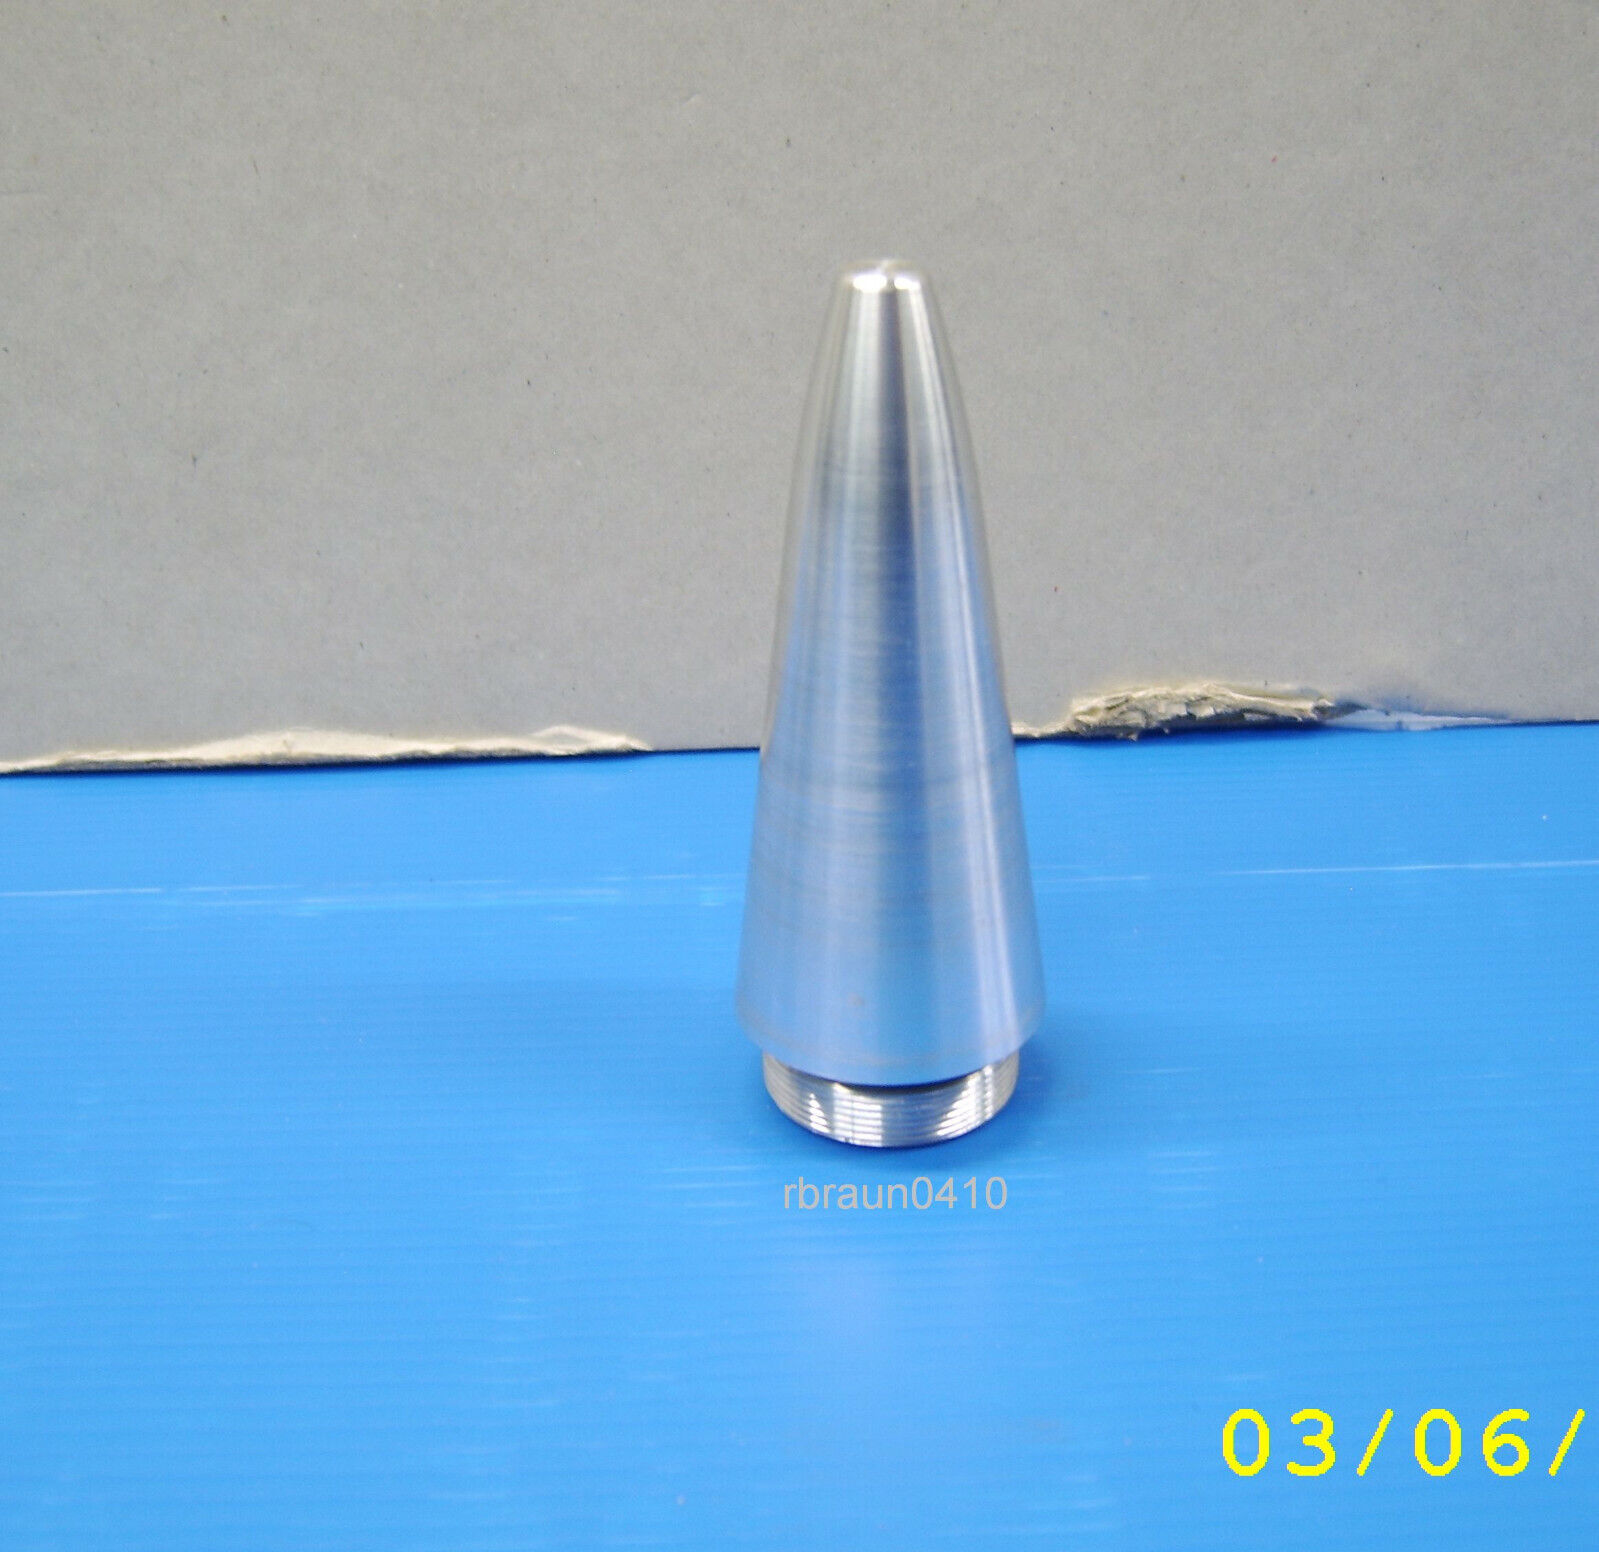 40mm Bofors L/70 replica nose cone.   Machined from solid aluminum